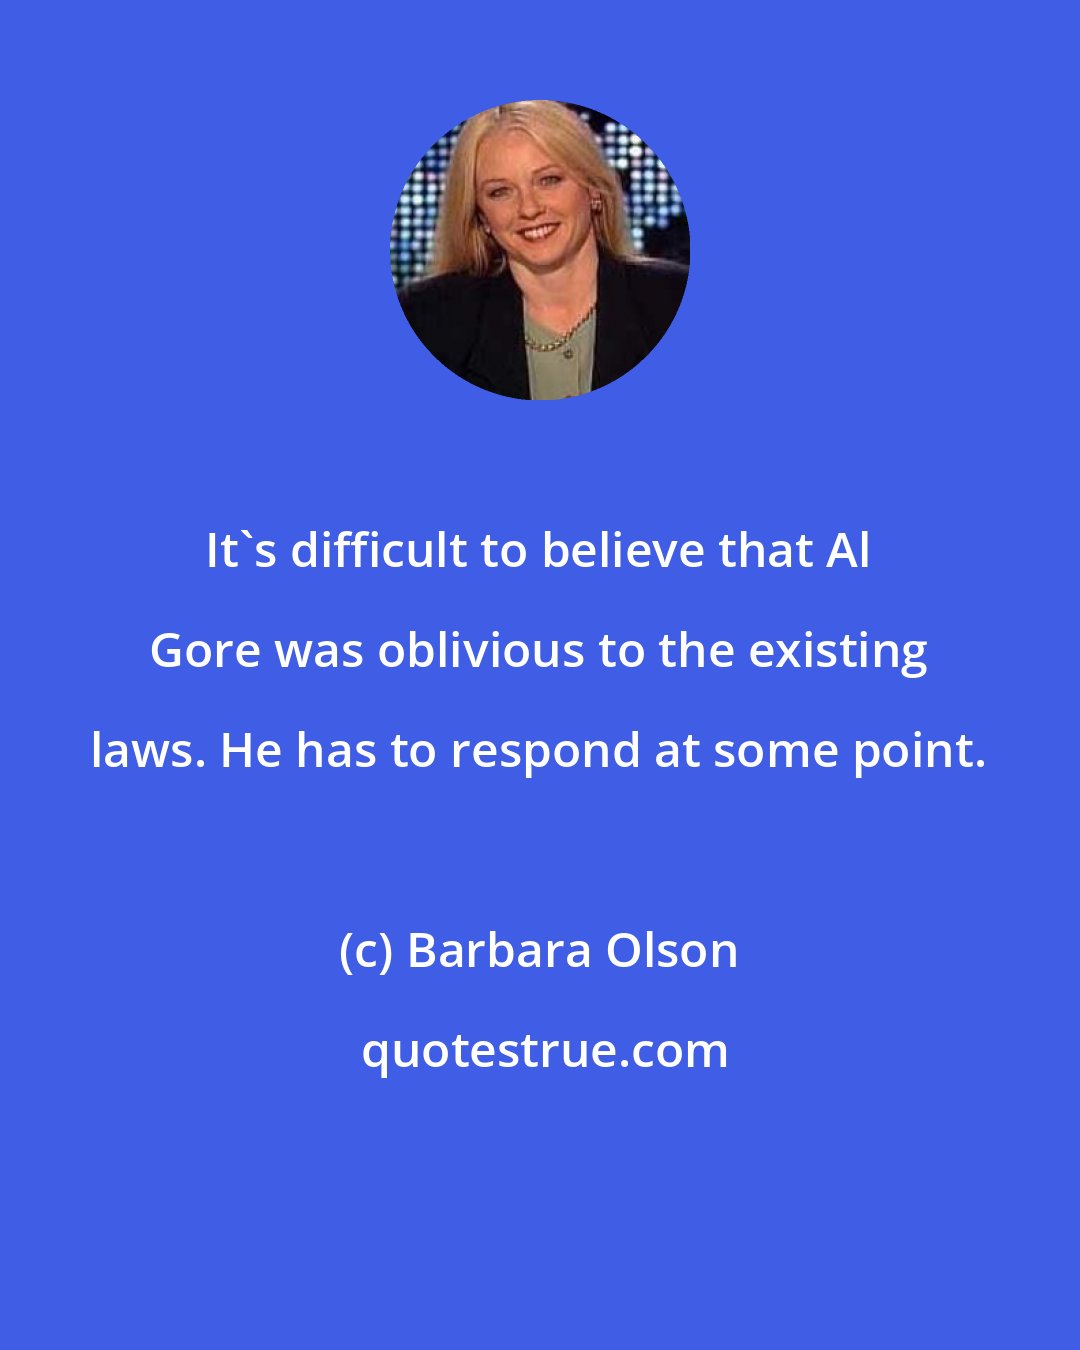 Barbara Olson: It's difficult to believe that Al Gore was oblivious to the existing laws. He has to respond at some point.